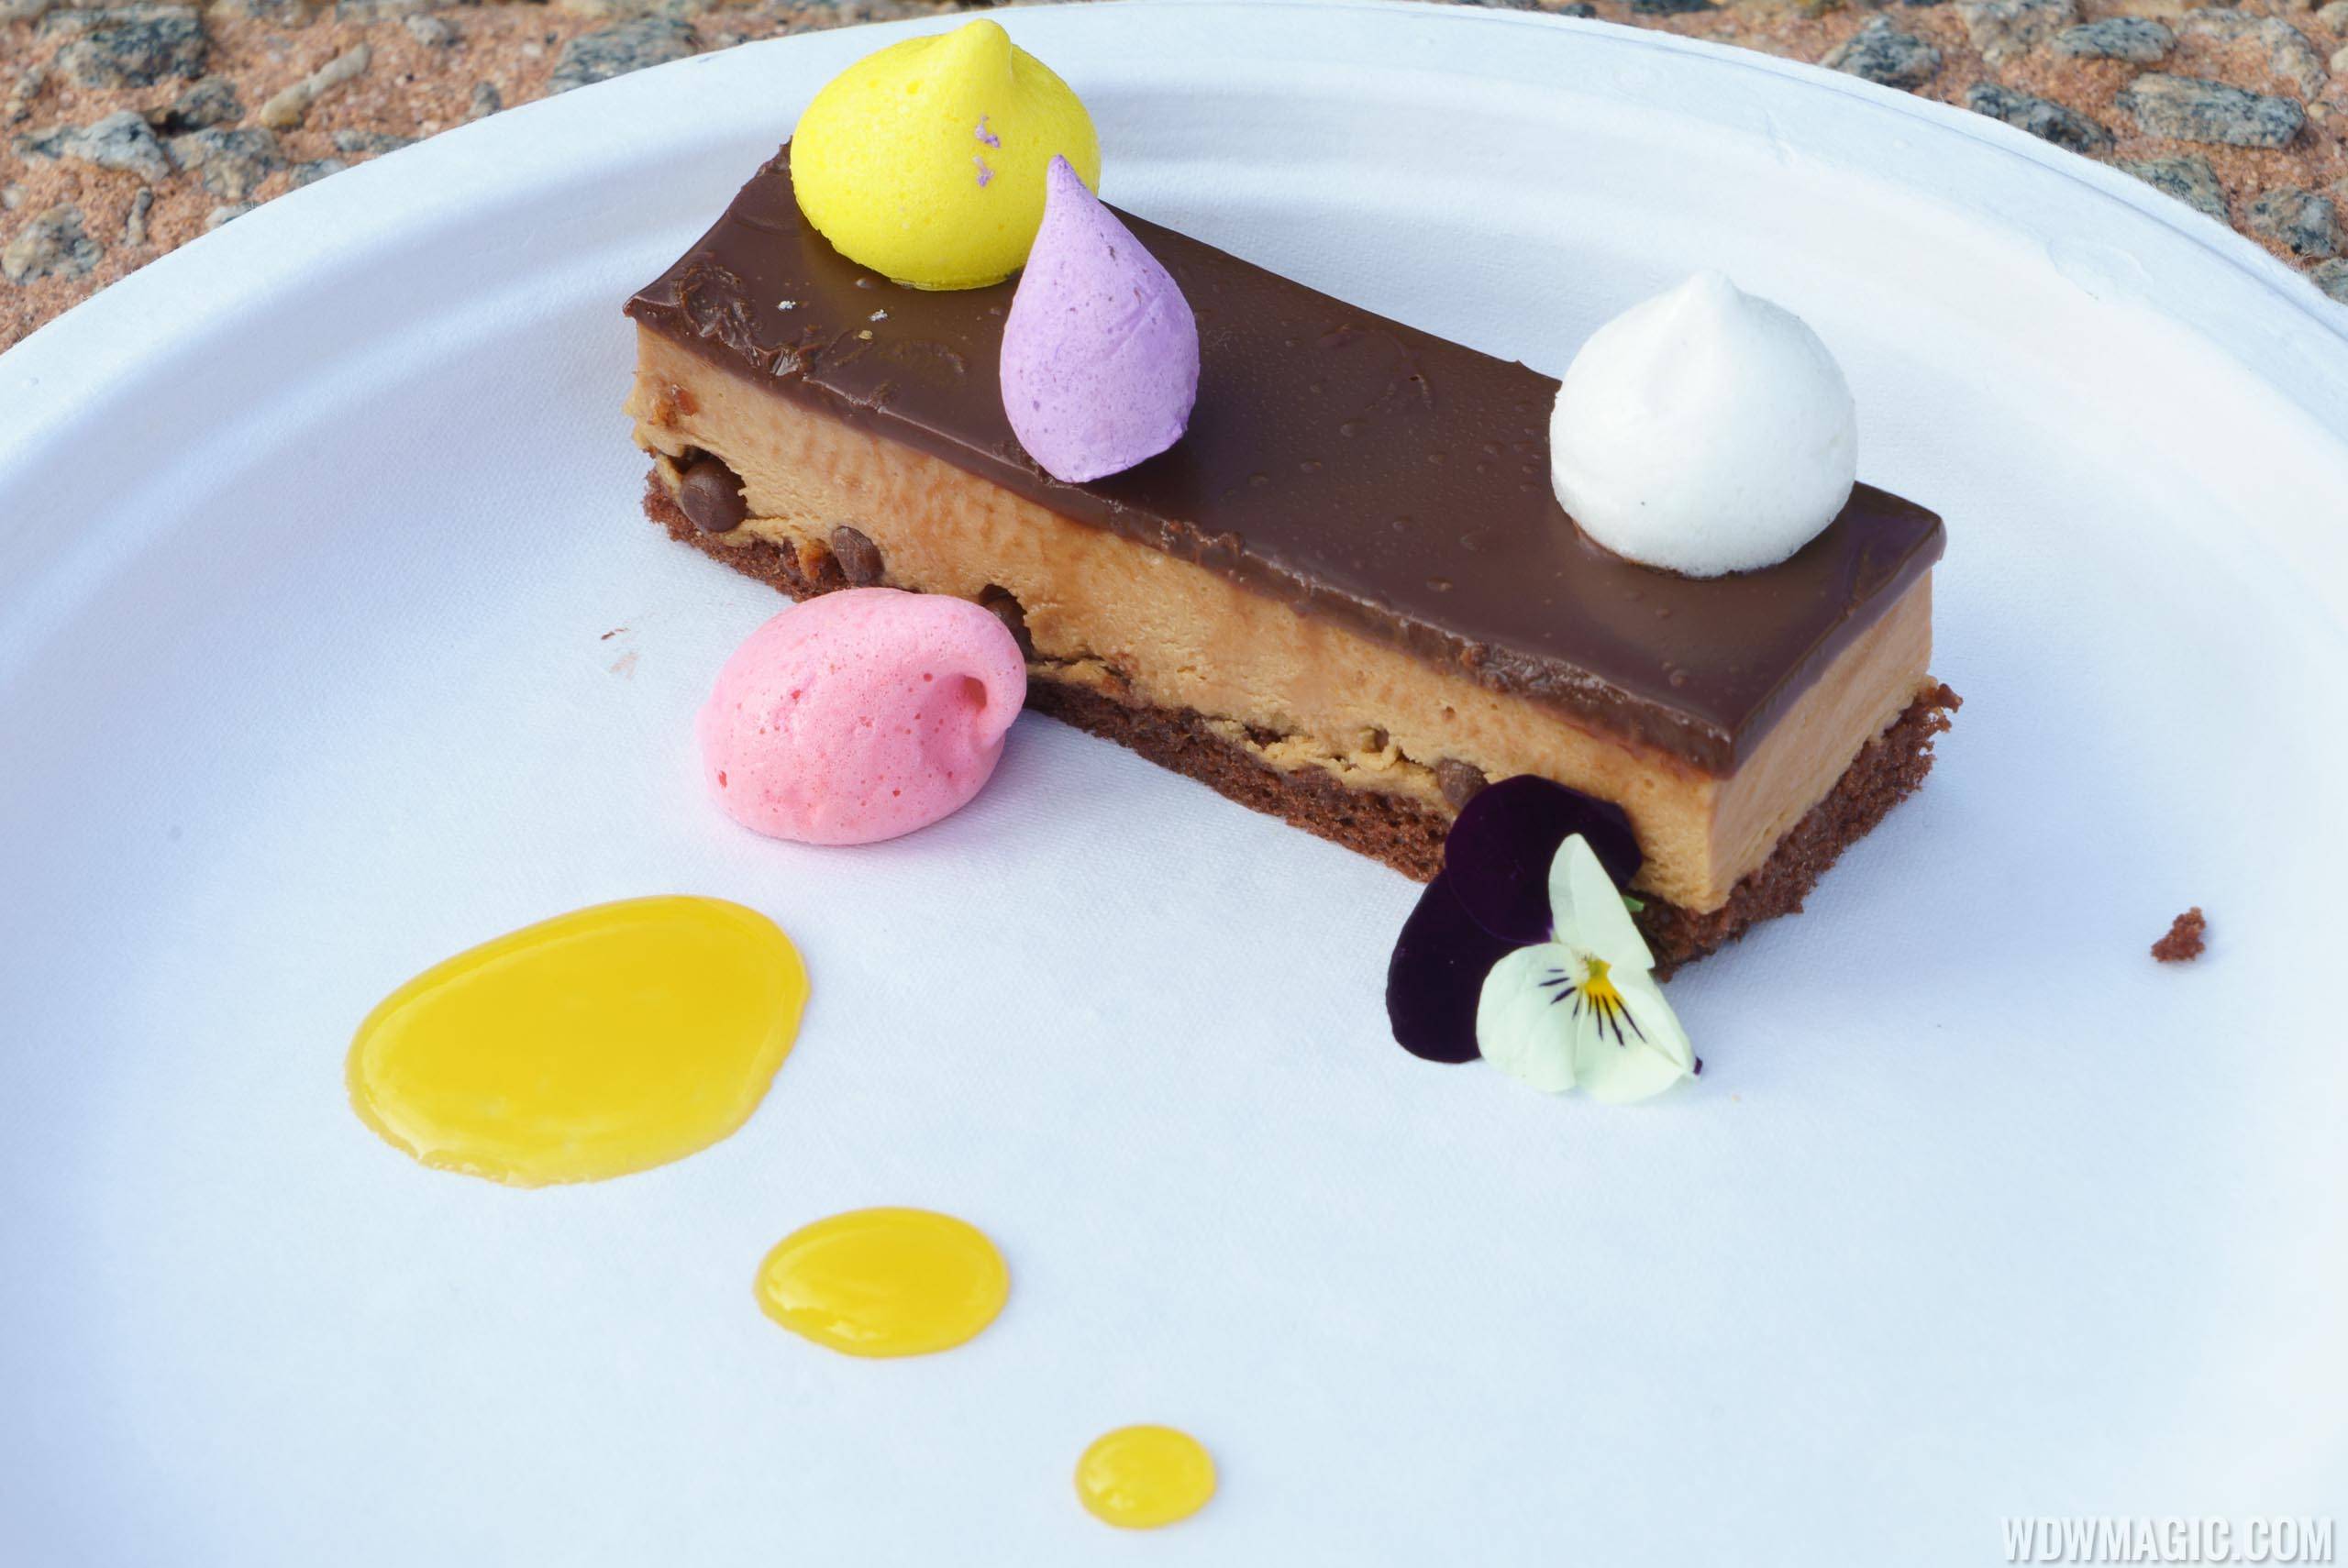 Festival of the Arts Food Studio - Decadent Delights - Crisp Caramel Chocolate Mousse Bar, Flavored Merengue Kisses and Passion Fruit Sauce